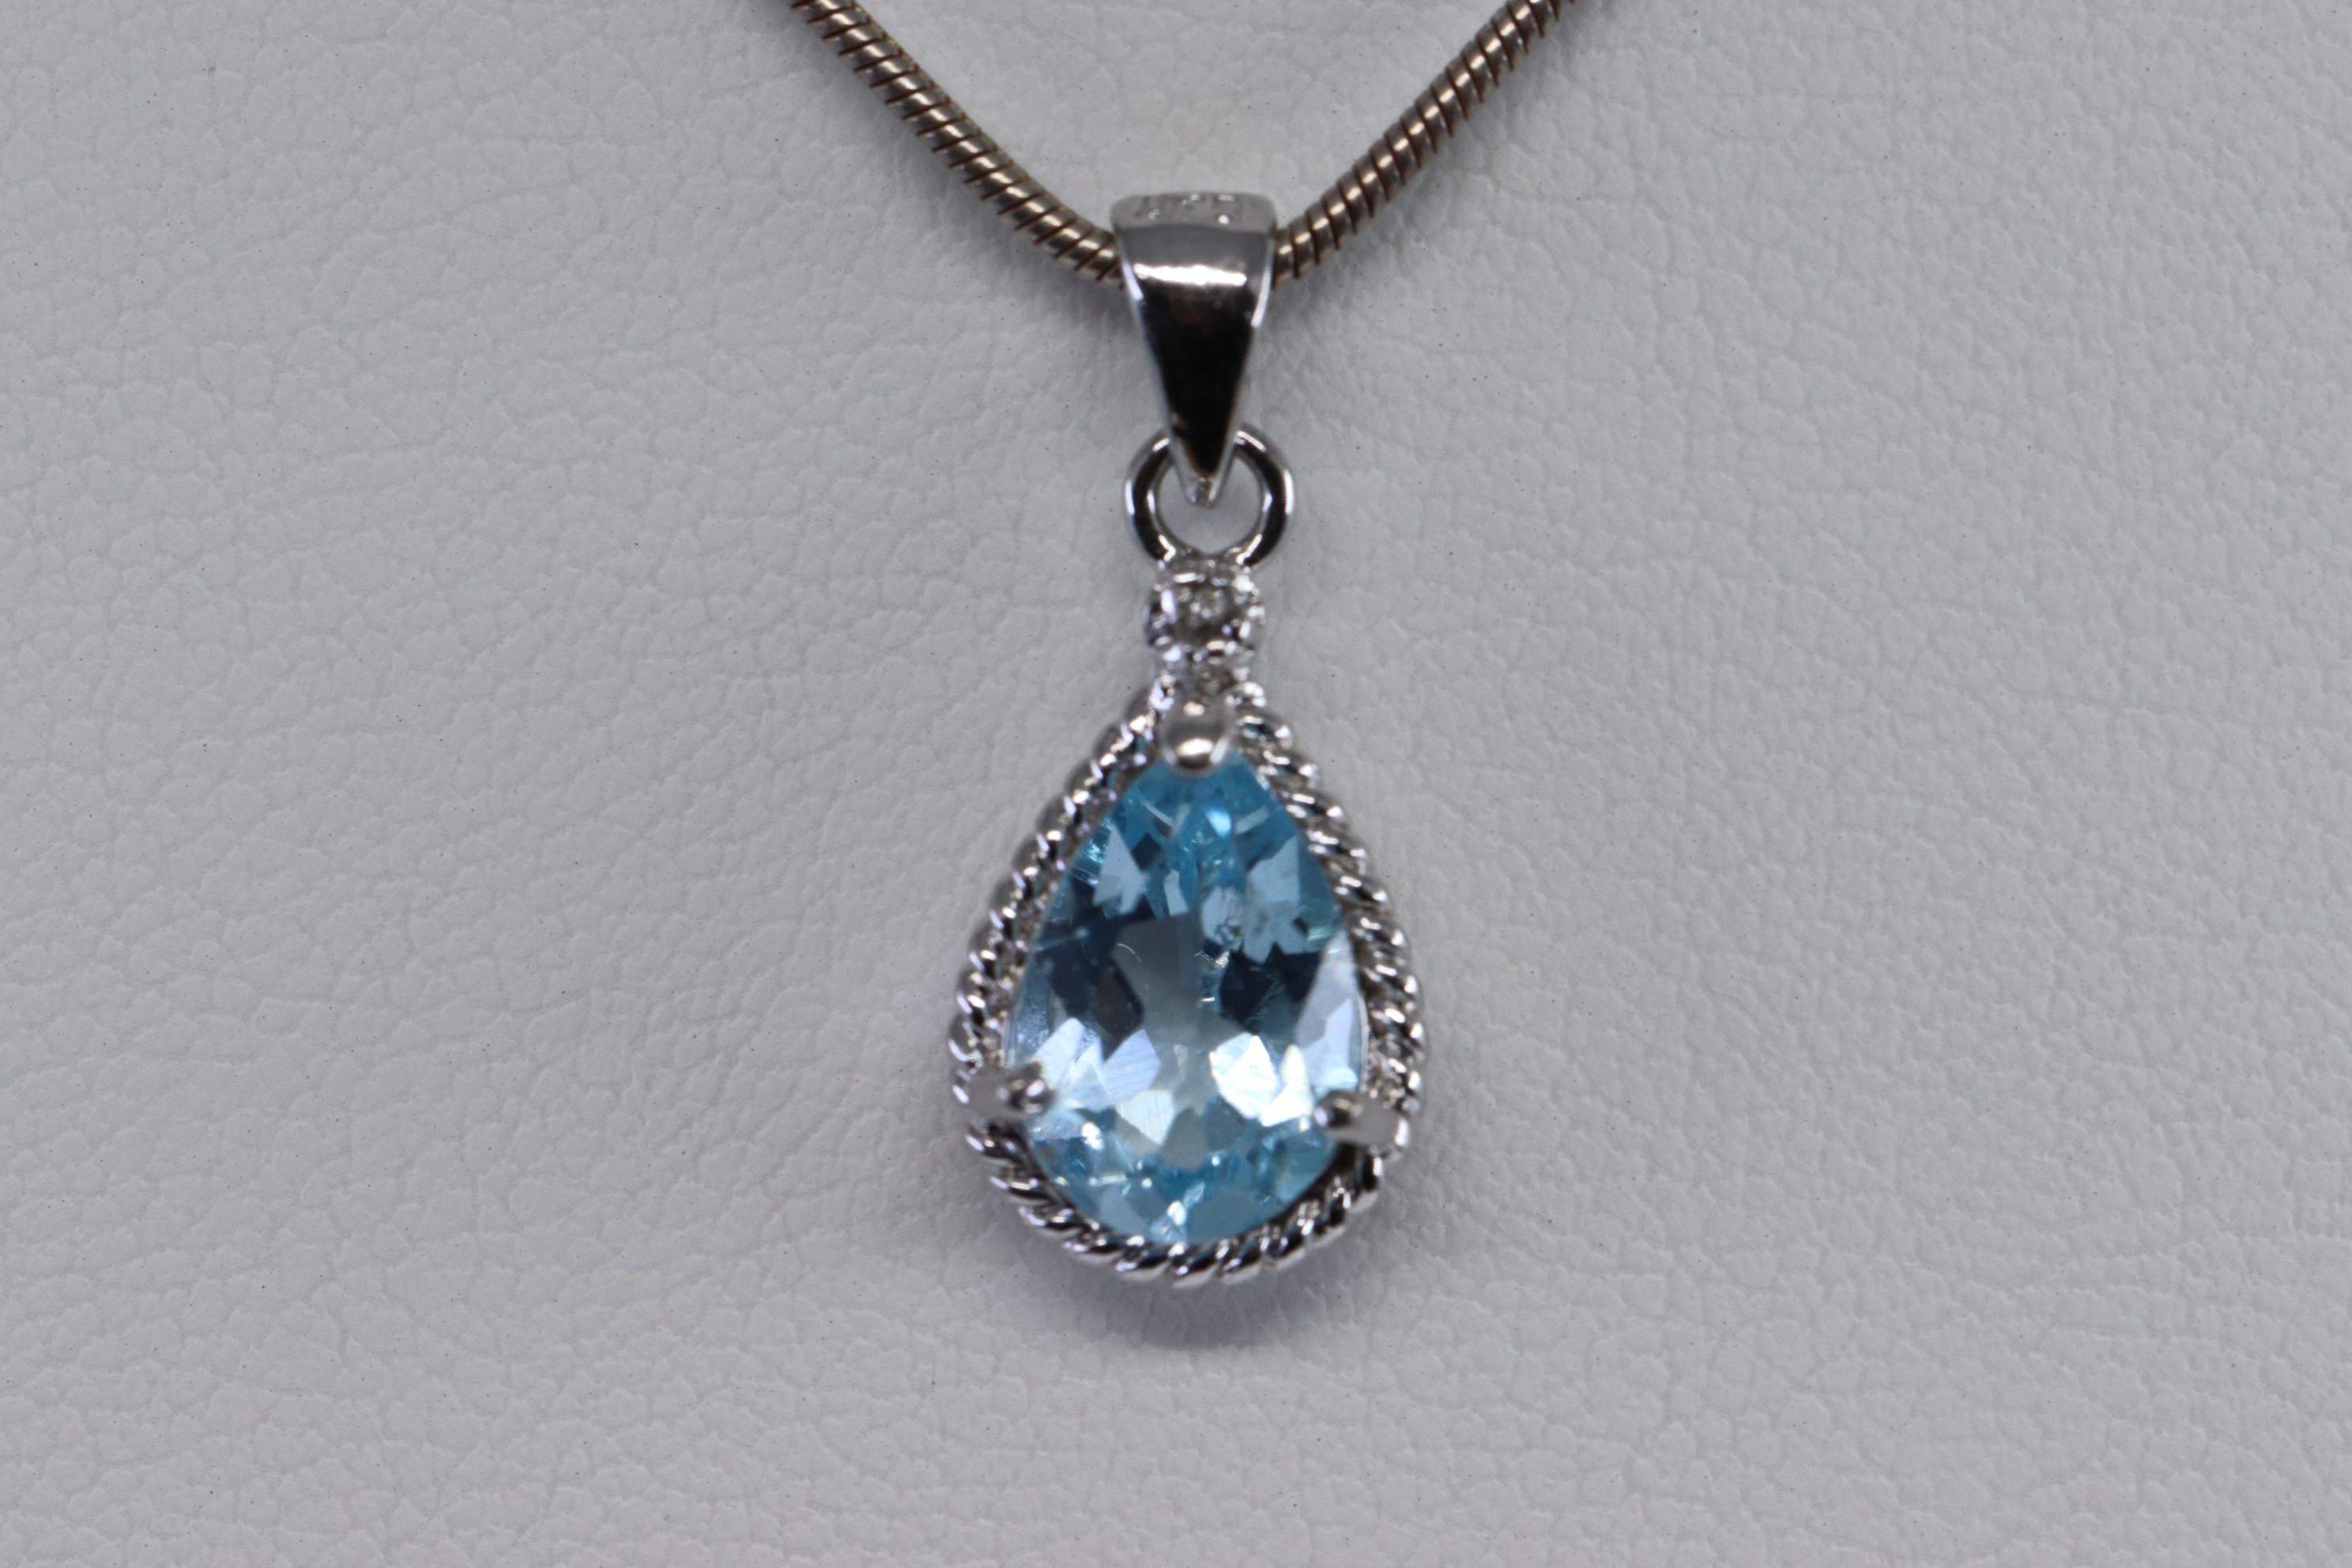 Large Blue Topaz Teardrop Sterling Silver Necklace - Shop Thrifty Treasures